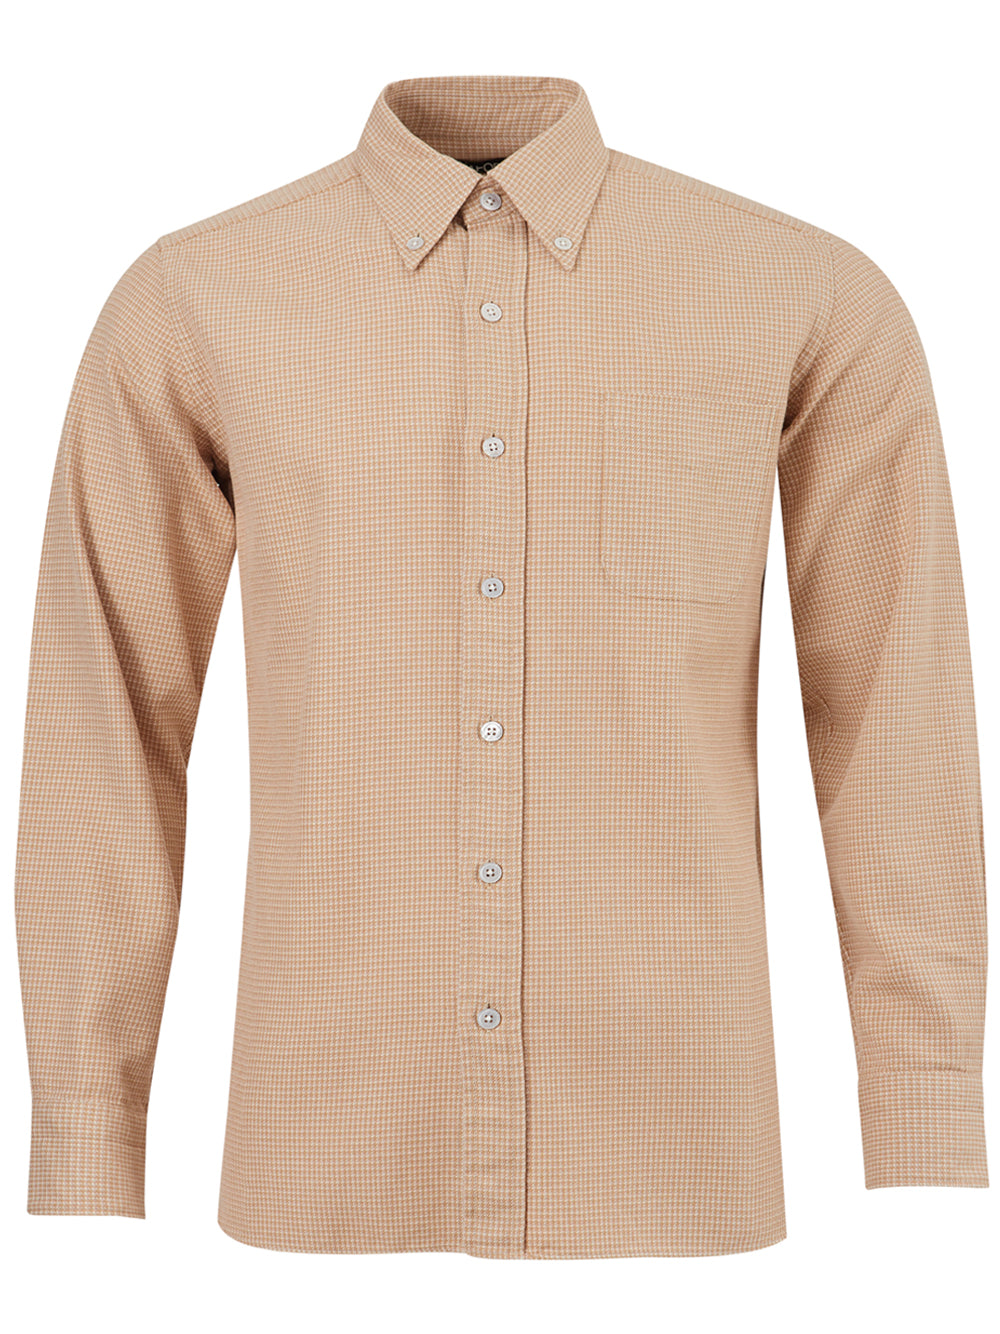 Camisa con microestampado 'Knitted' de Tom Ford